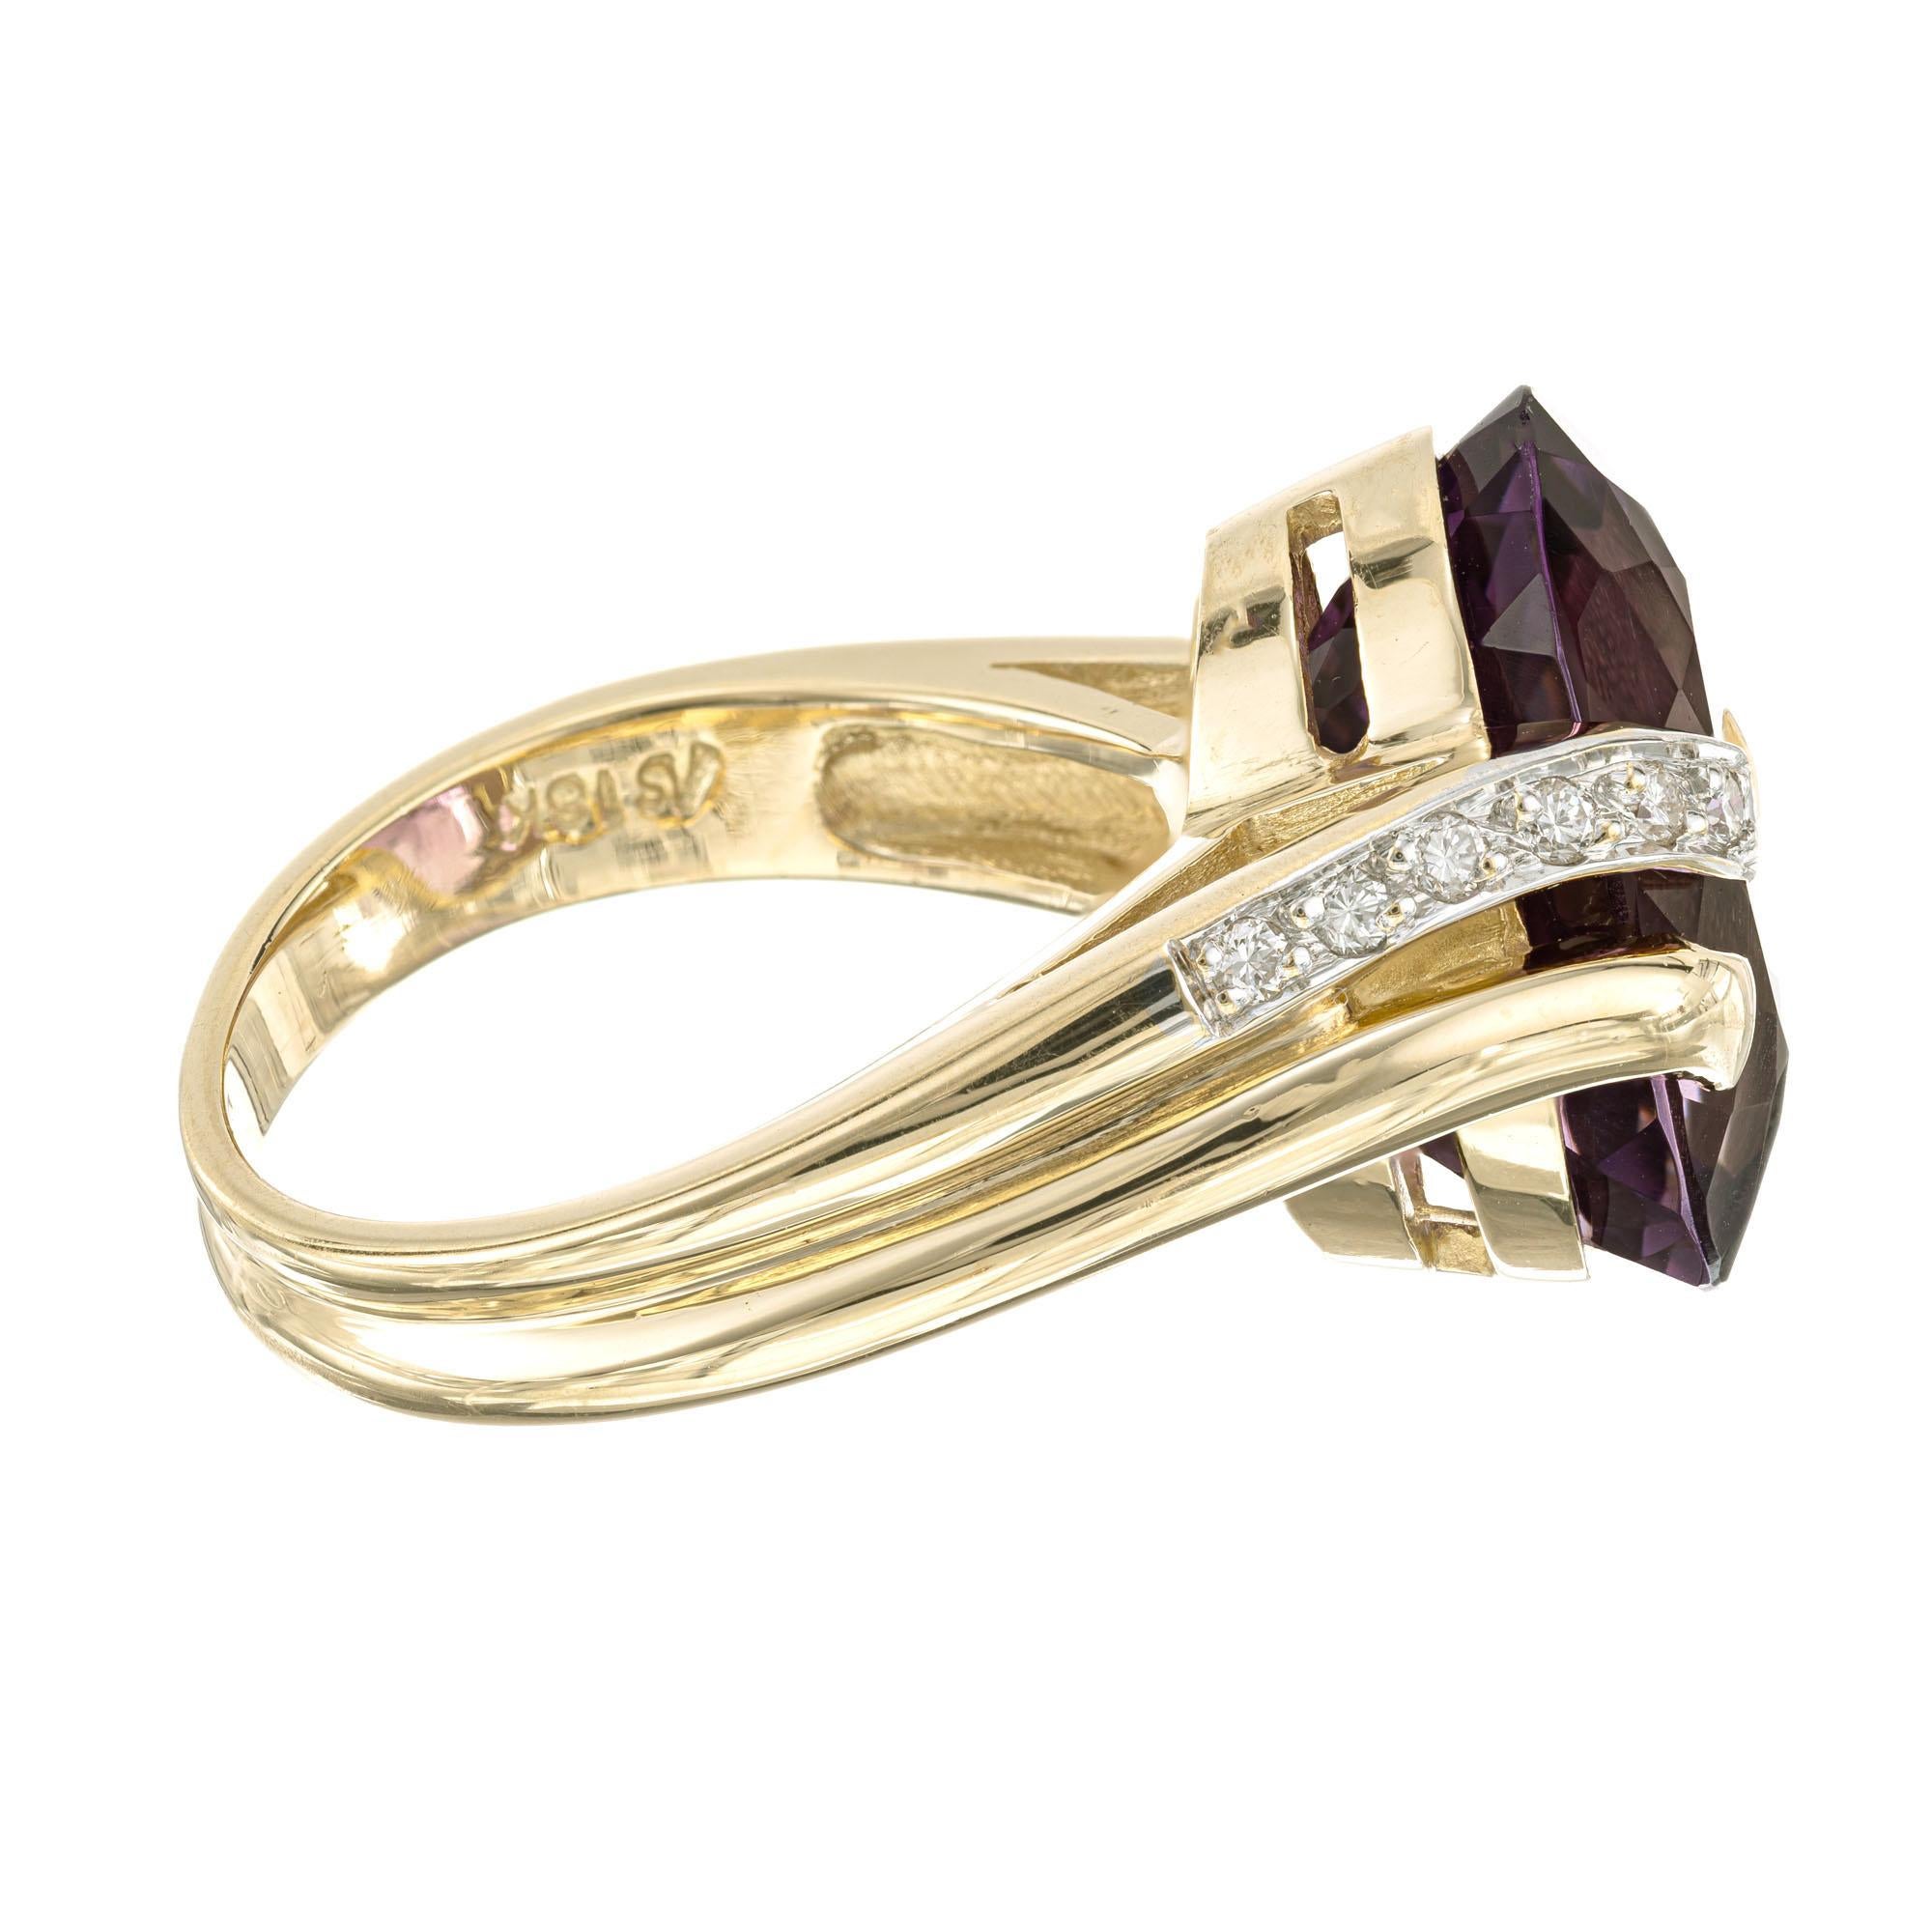 1960s 6.00 Carat Oval Amethyst Diamond Gold Swirl Cocktail Ring In Good Condition For Sale In Stamford, CT